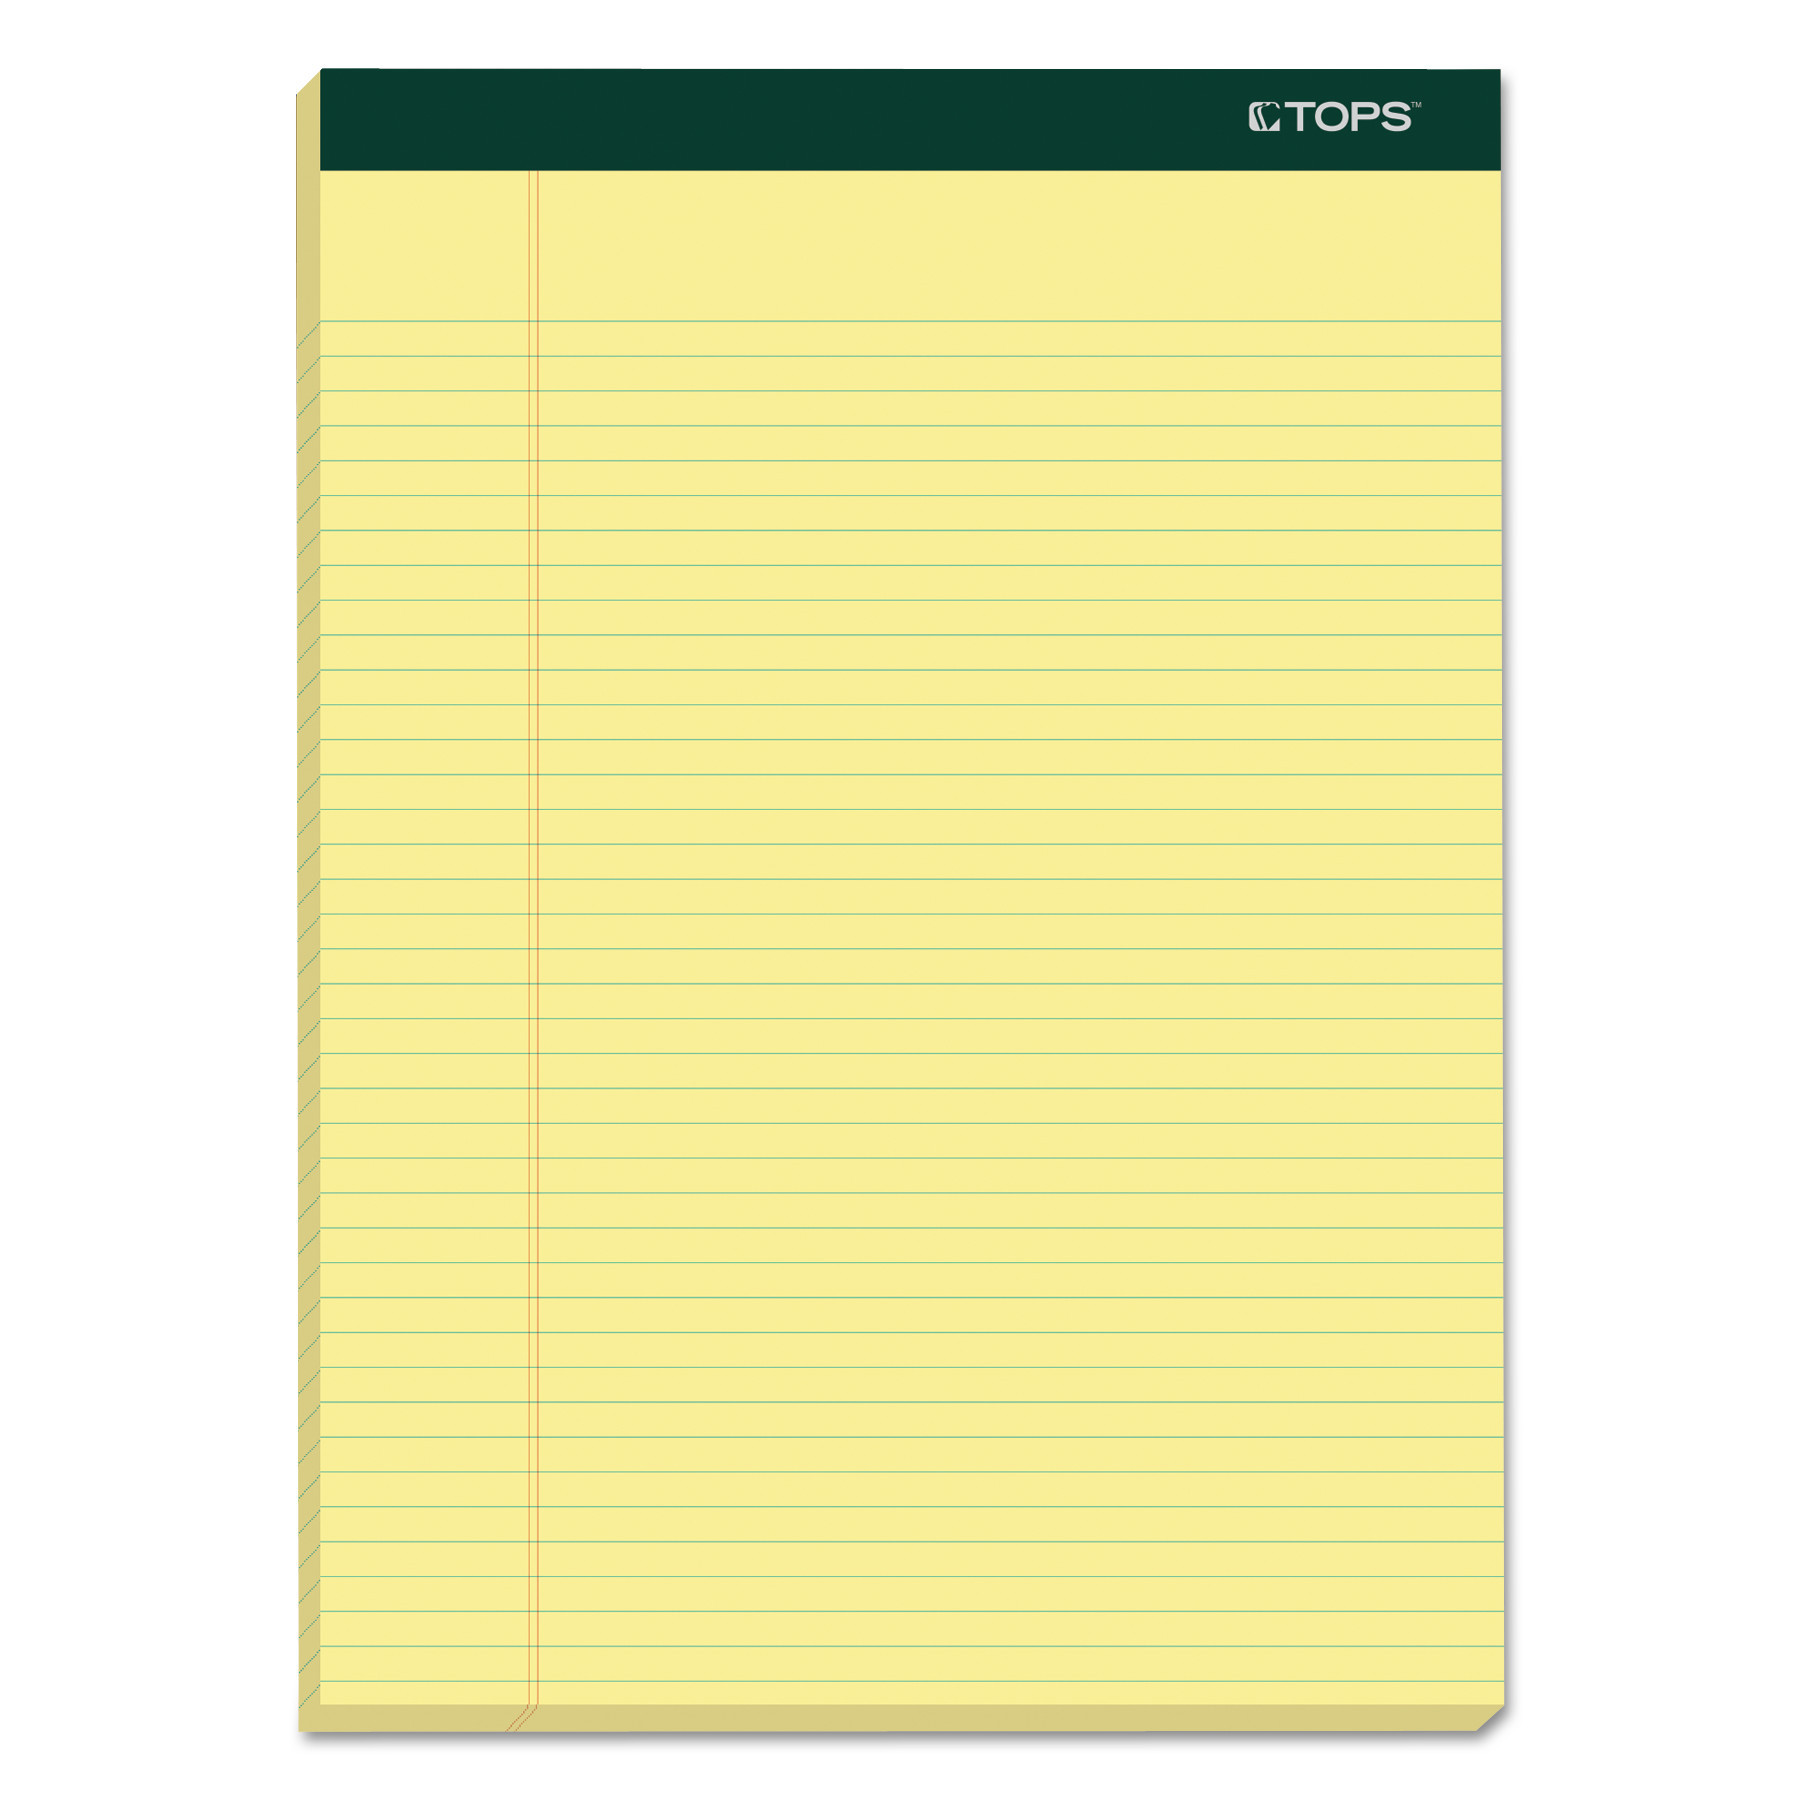  TOPS 63376 Double Docket Ruled Pads, Narrow Rule, 8.5 x 11.75, Canary, 100 Sheets, 6/Pack (TOP63376) 